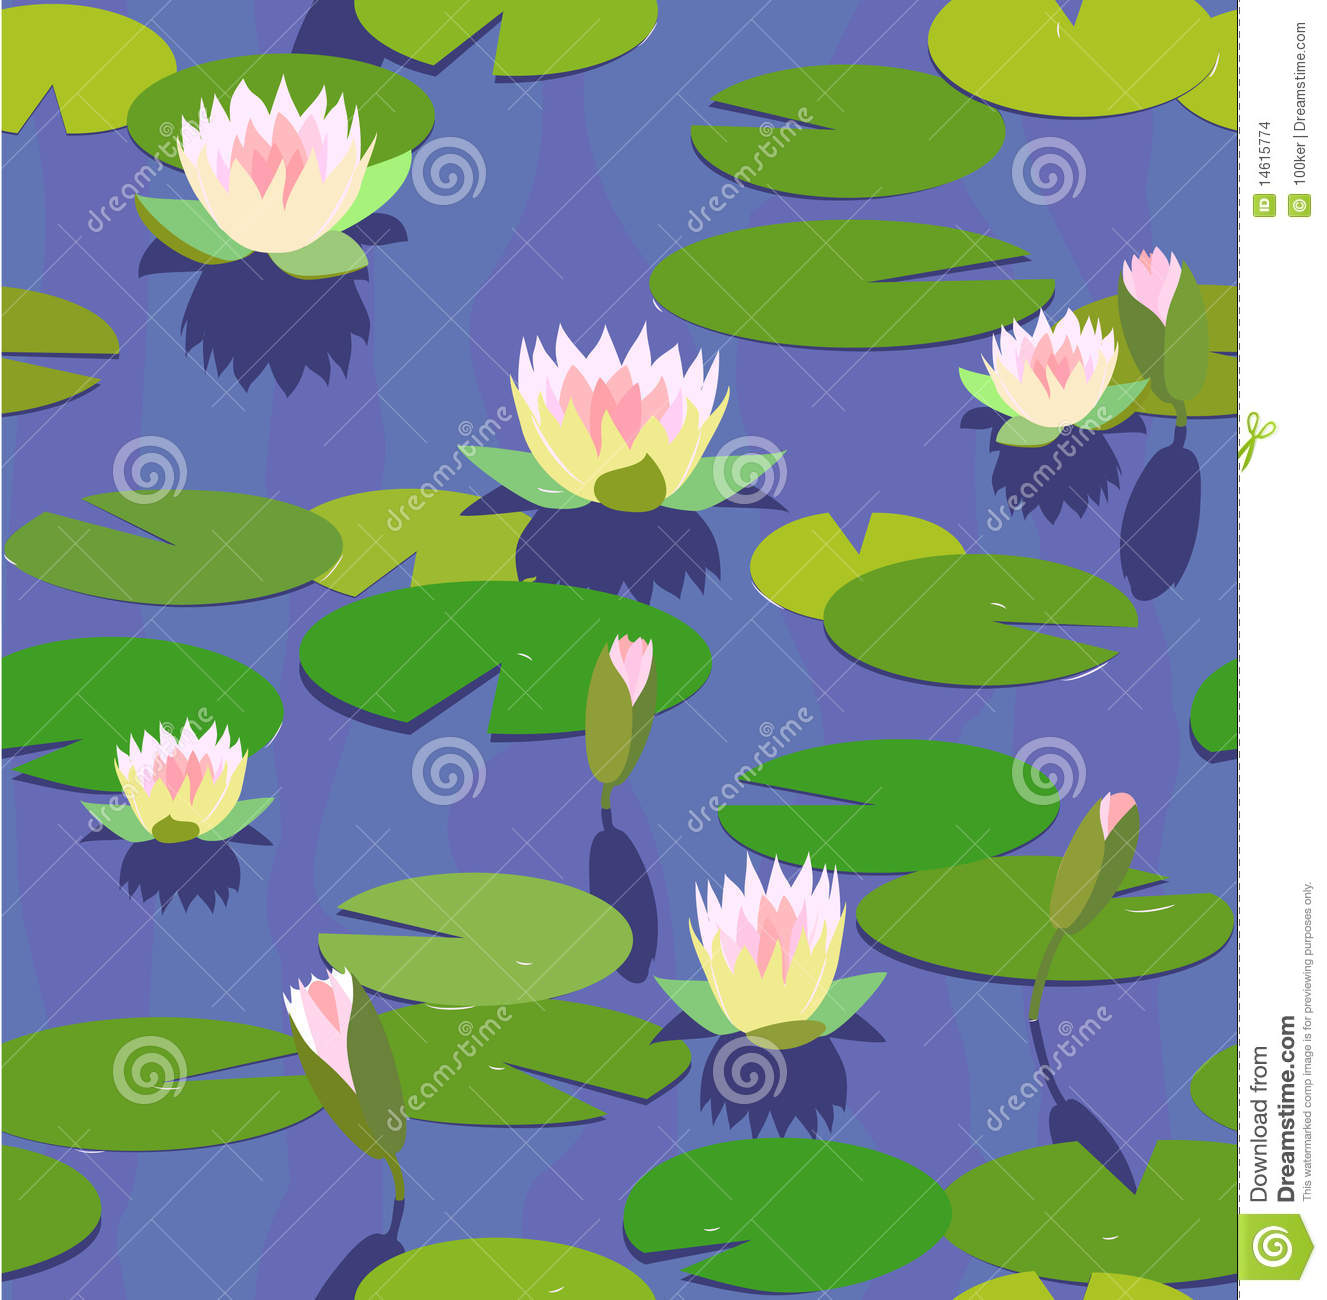 Lily Pond For Pinterest